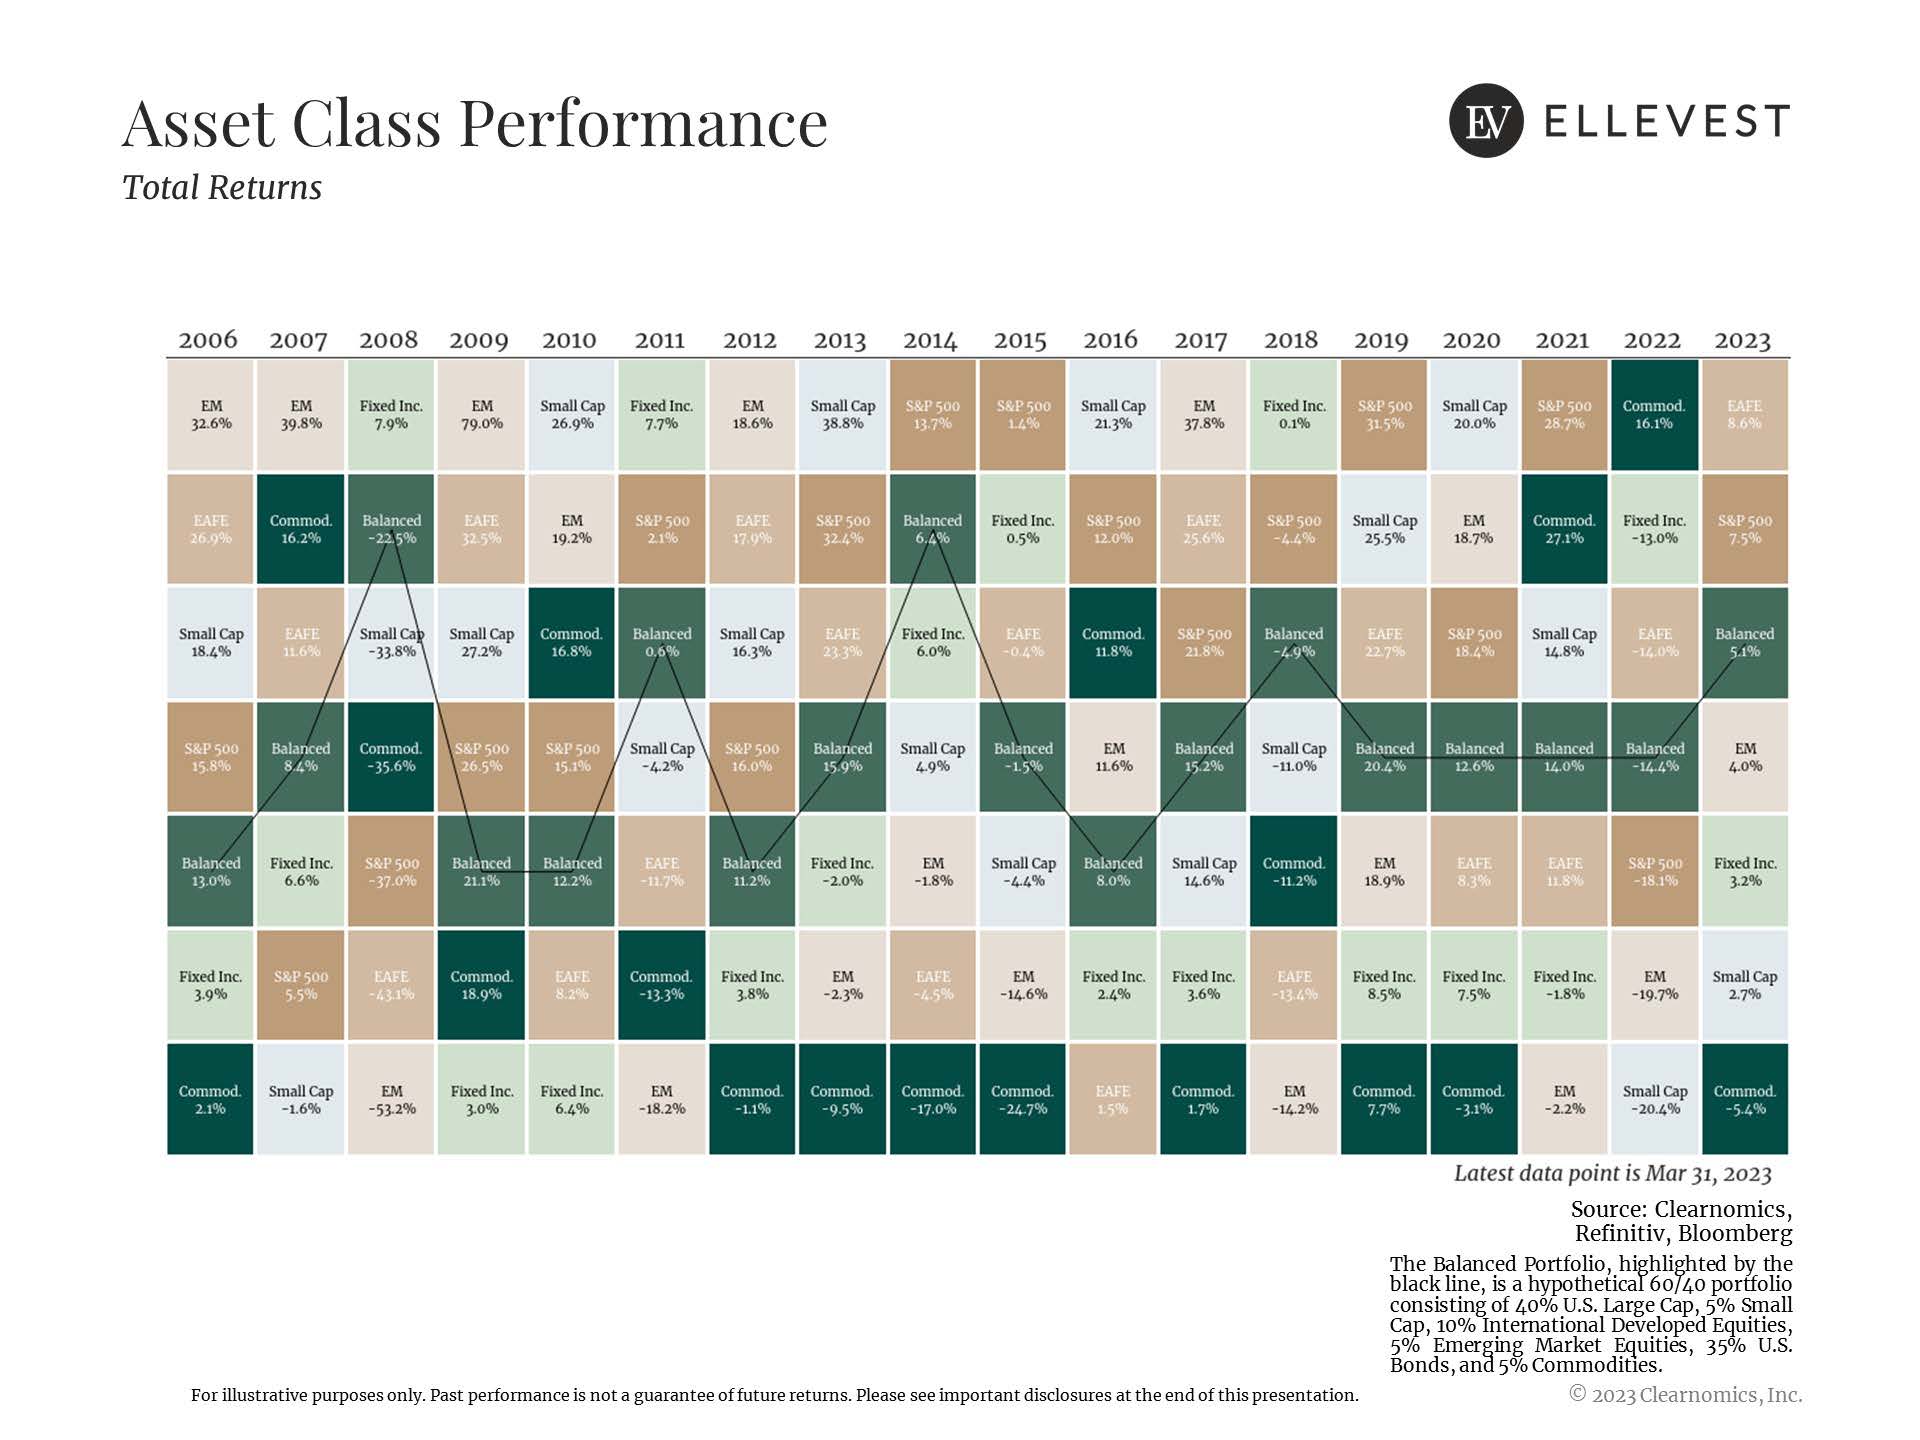 A chart tracking the performance of asset classes EM, EAFE, Small Cap, S&P 500, Fixed Inc, and Commodities, in addition to a balanced portofolio comprised of 60% stocks and 40% bonds, from 2006 to present. Each year, each asset is represented by a block in a column that are stacked based on how well they performed. A black line connects the Balanced Portfolio performance over time, indicating that it falls somewhere in the middle of the road every year.